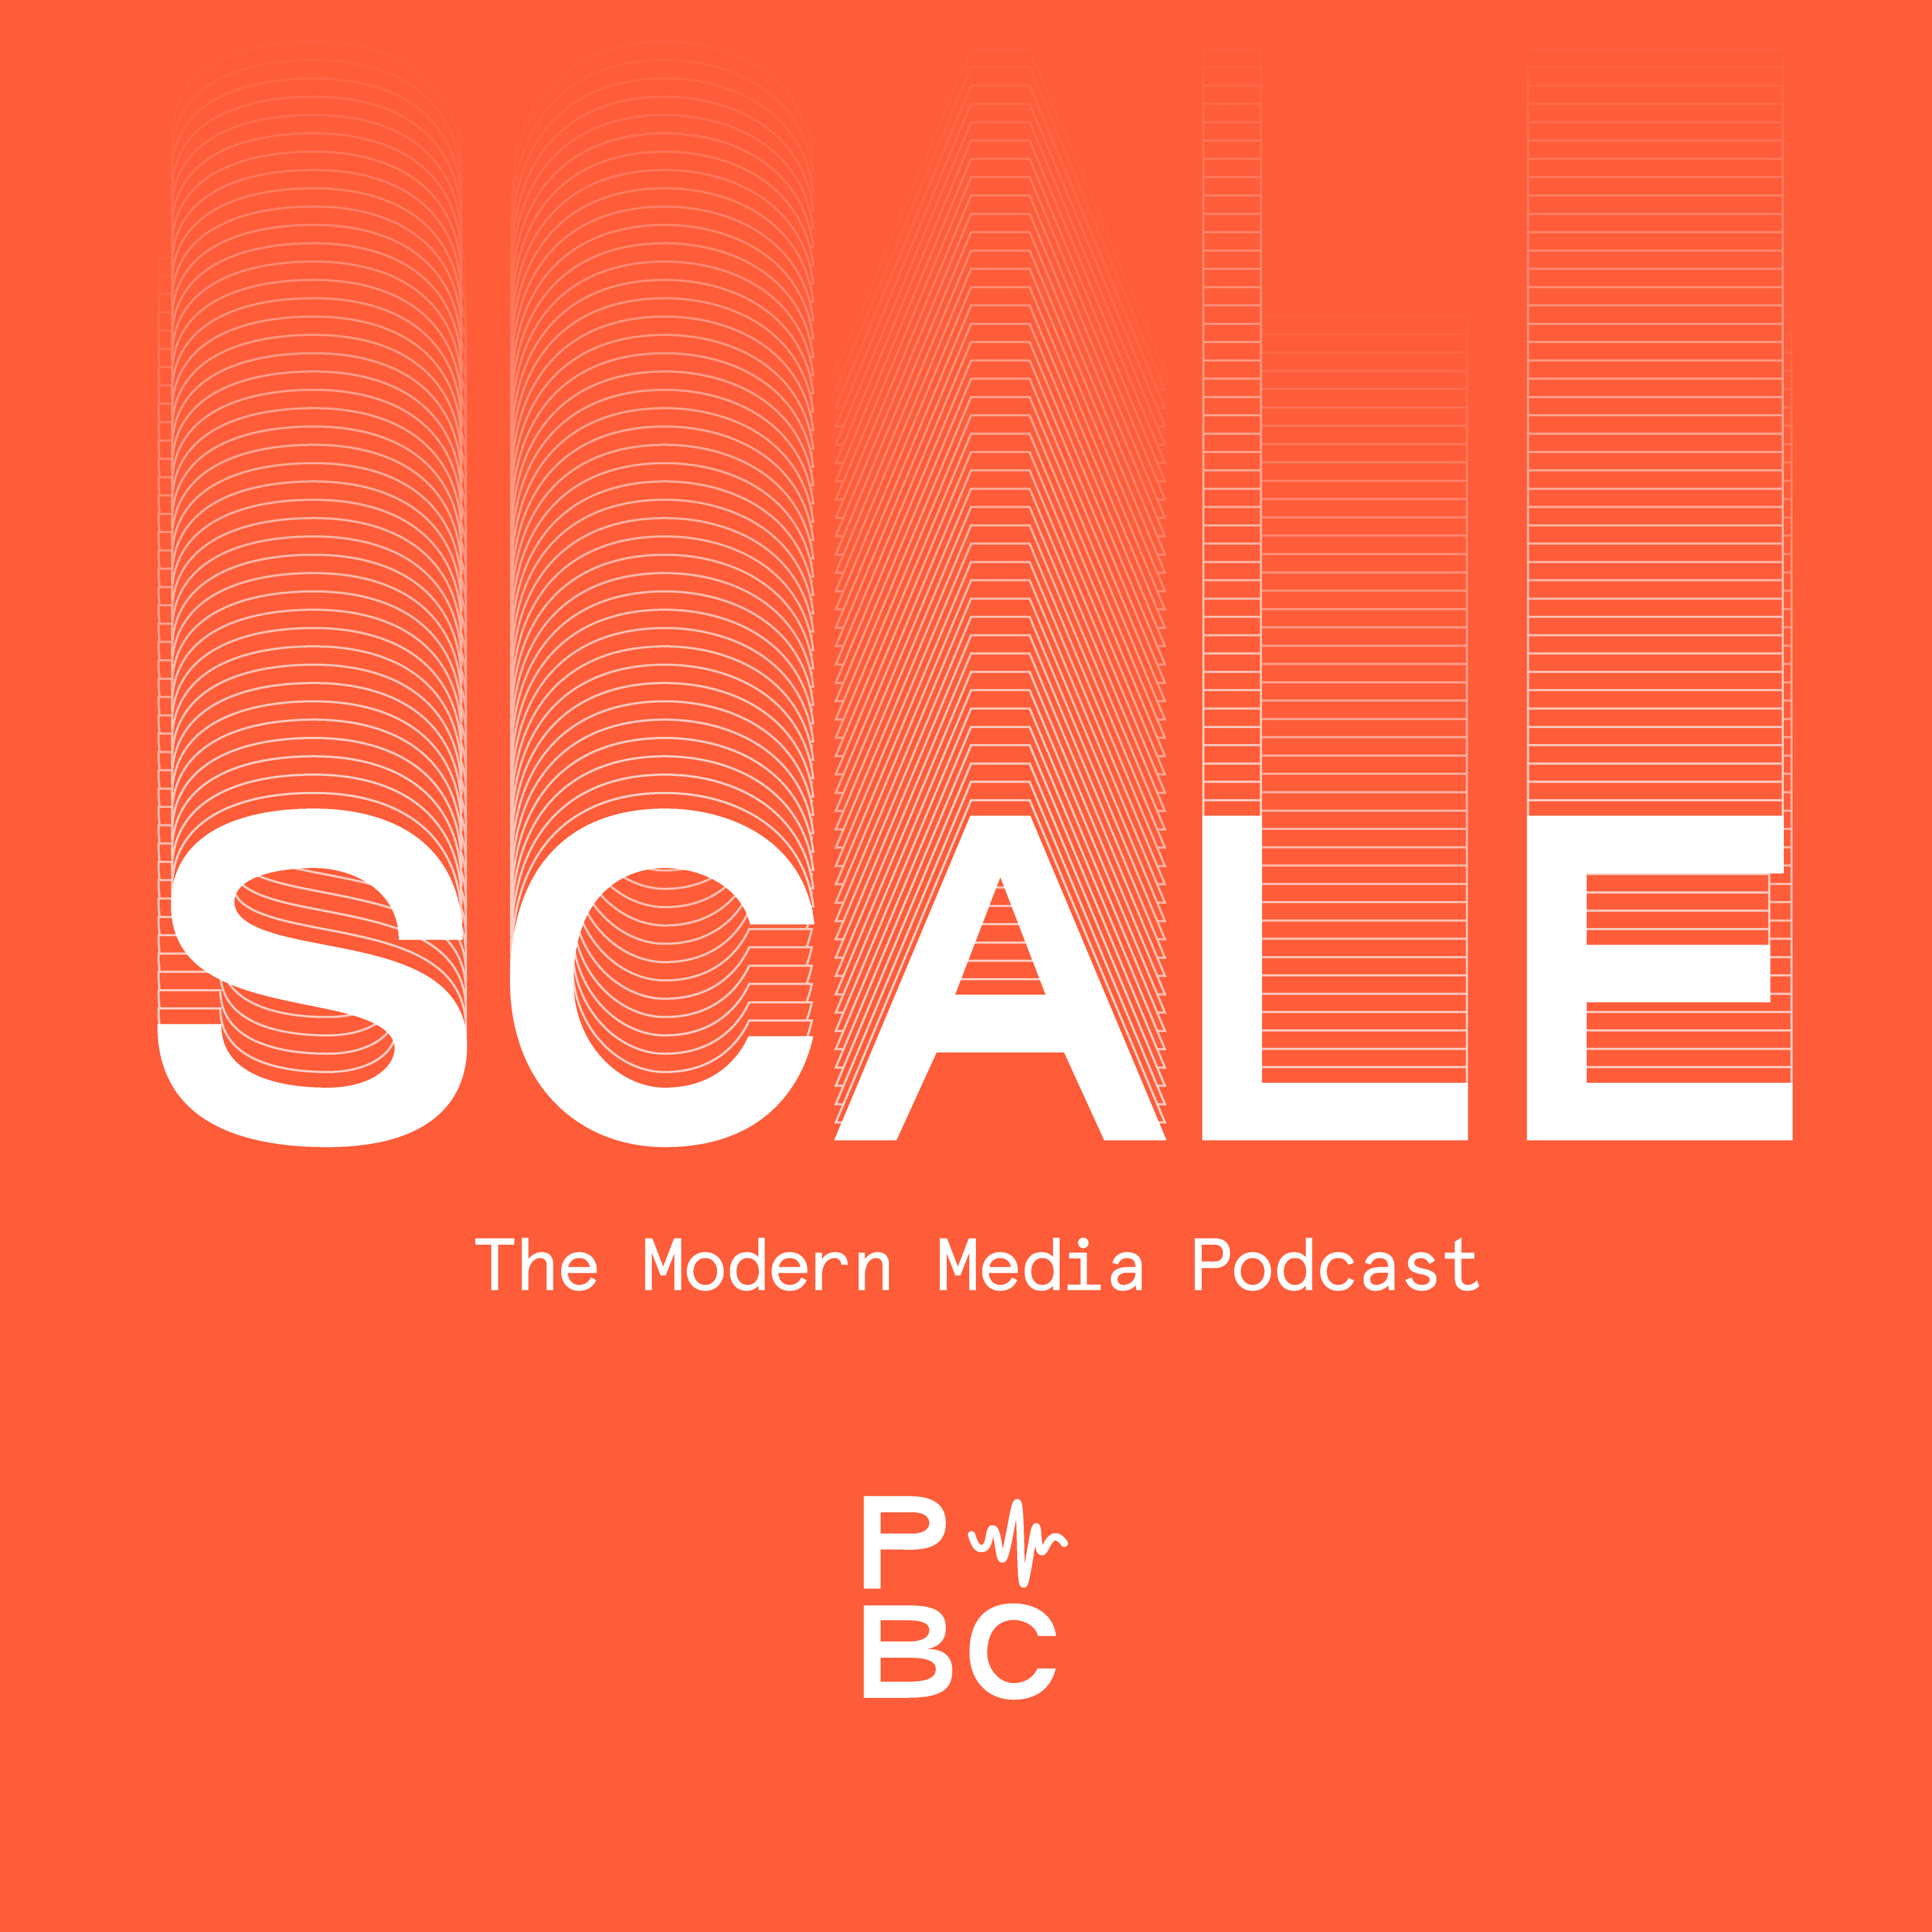 Scale Podcast Cover Art. Scale is a podcast for modern digital media and publishing professionals